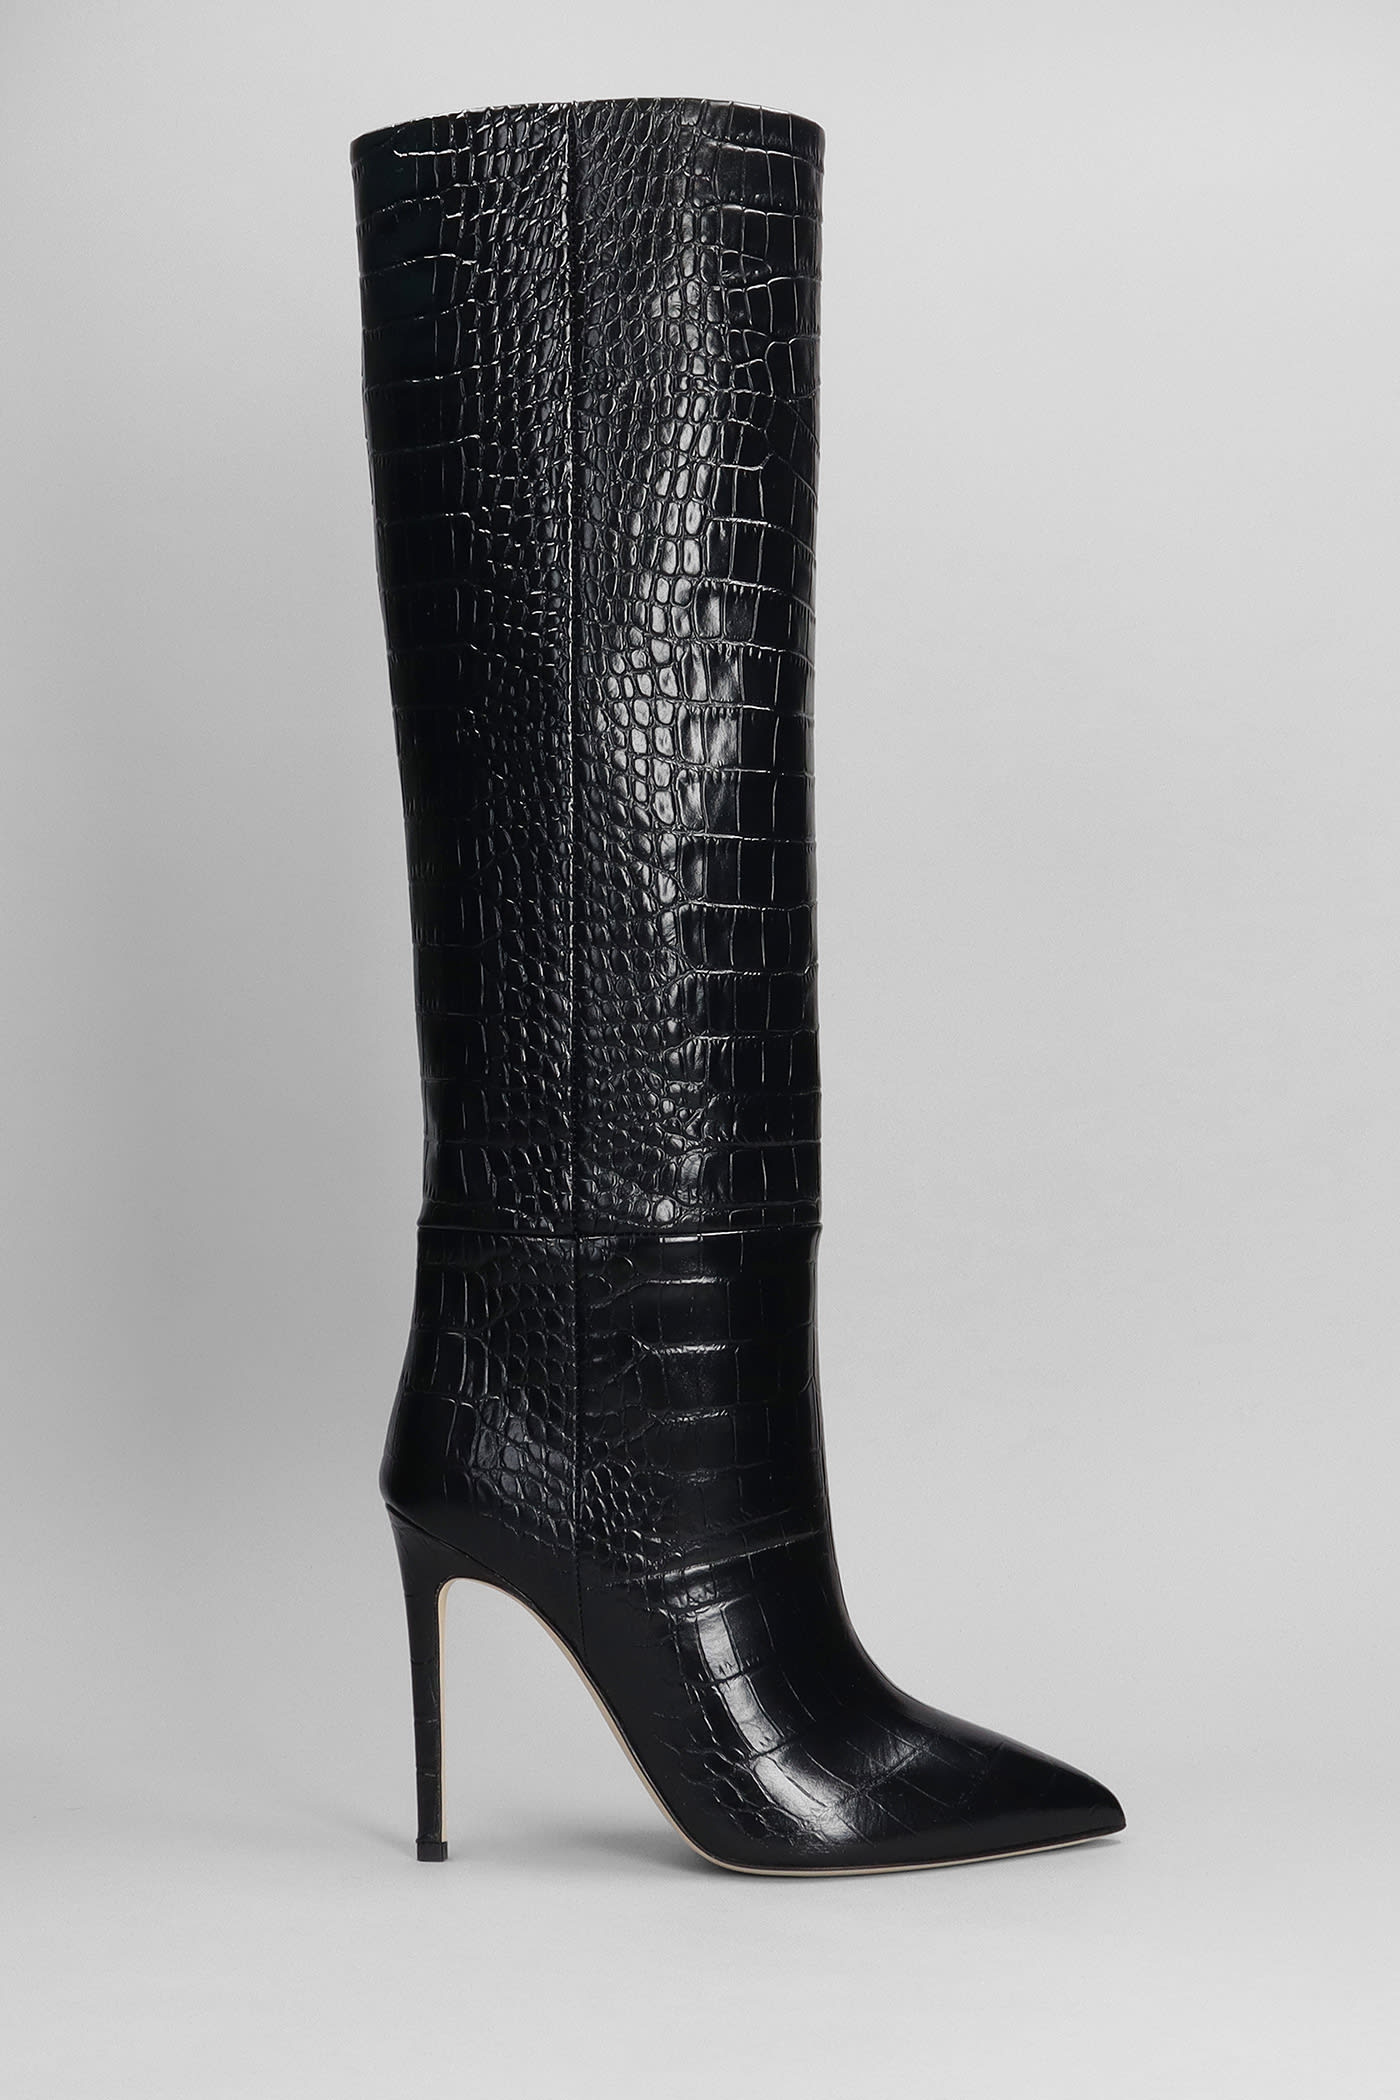 PARIS TEXAS HIGH HEELS BOOTS IN BLACK LEATHER